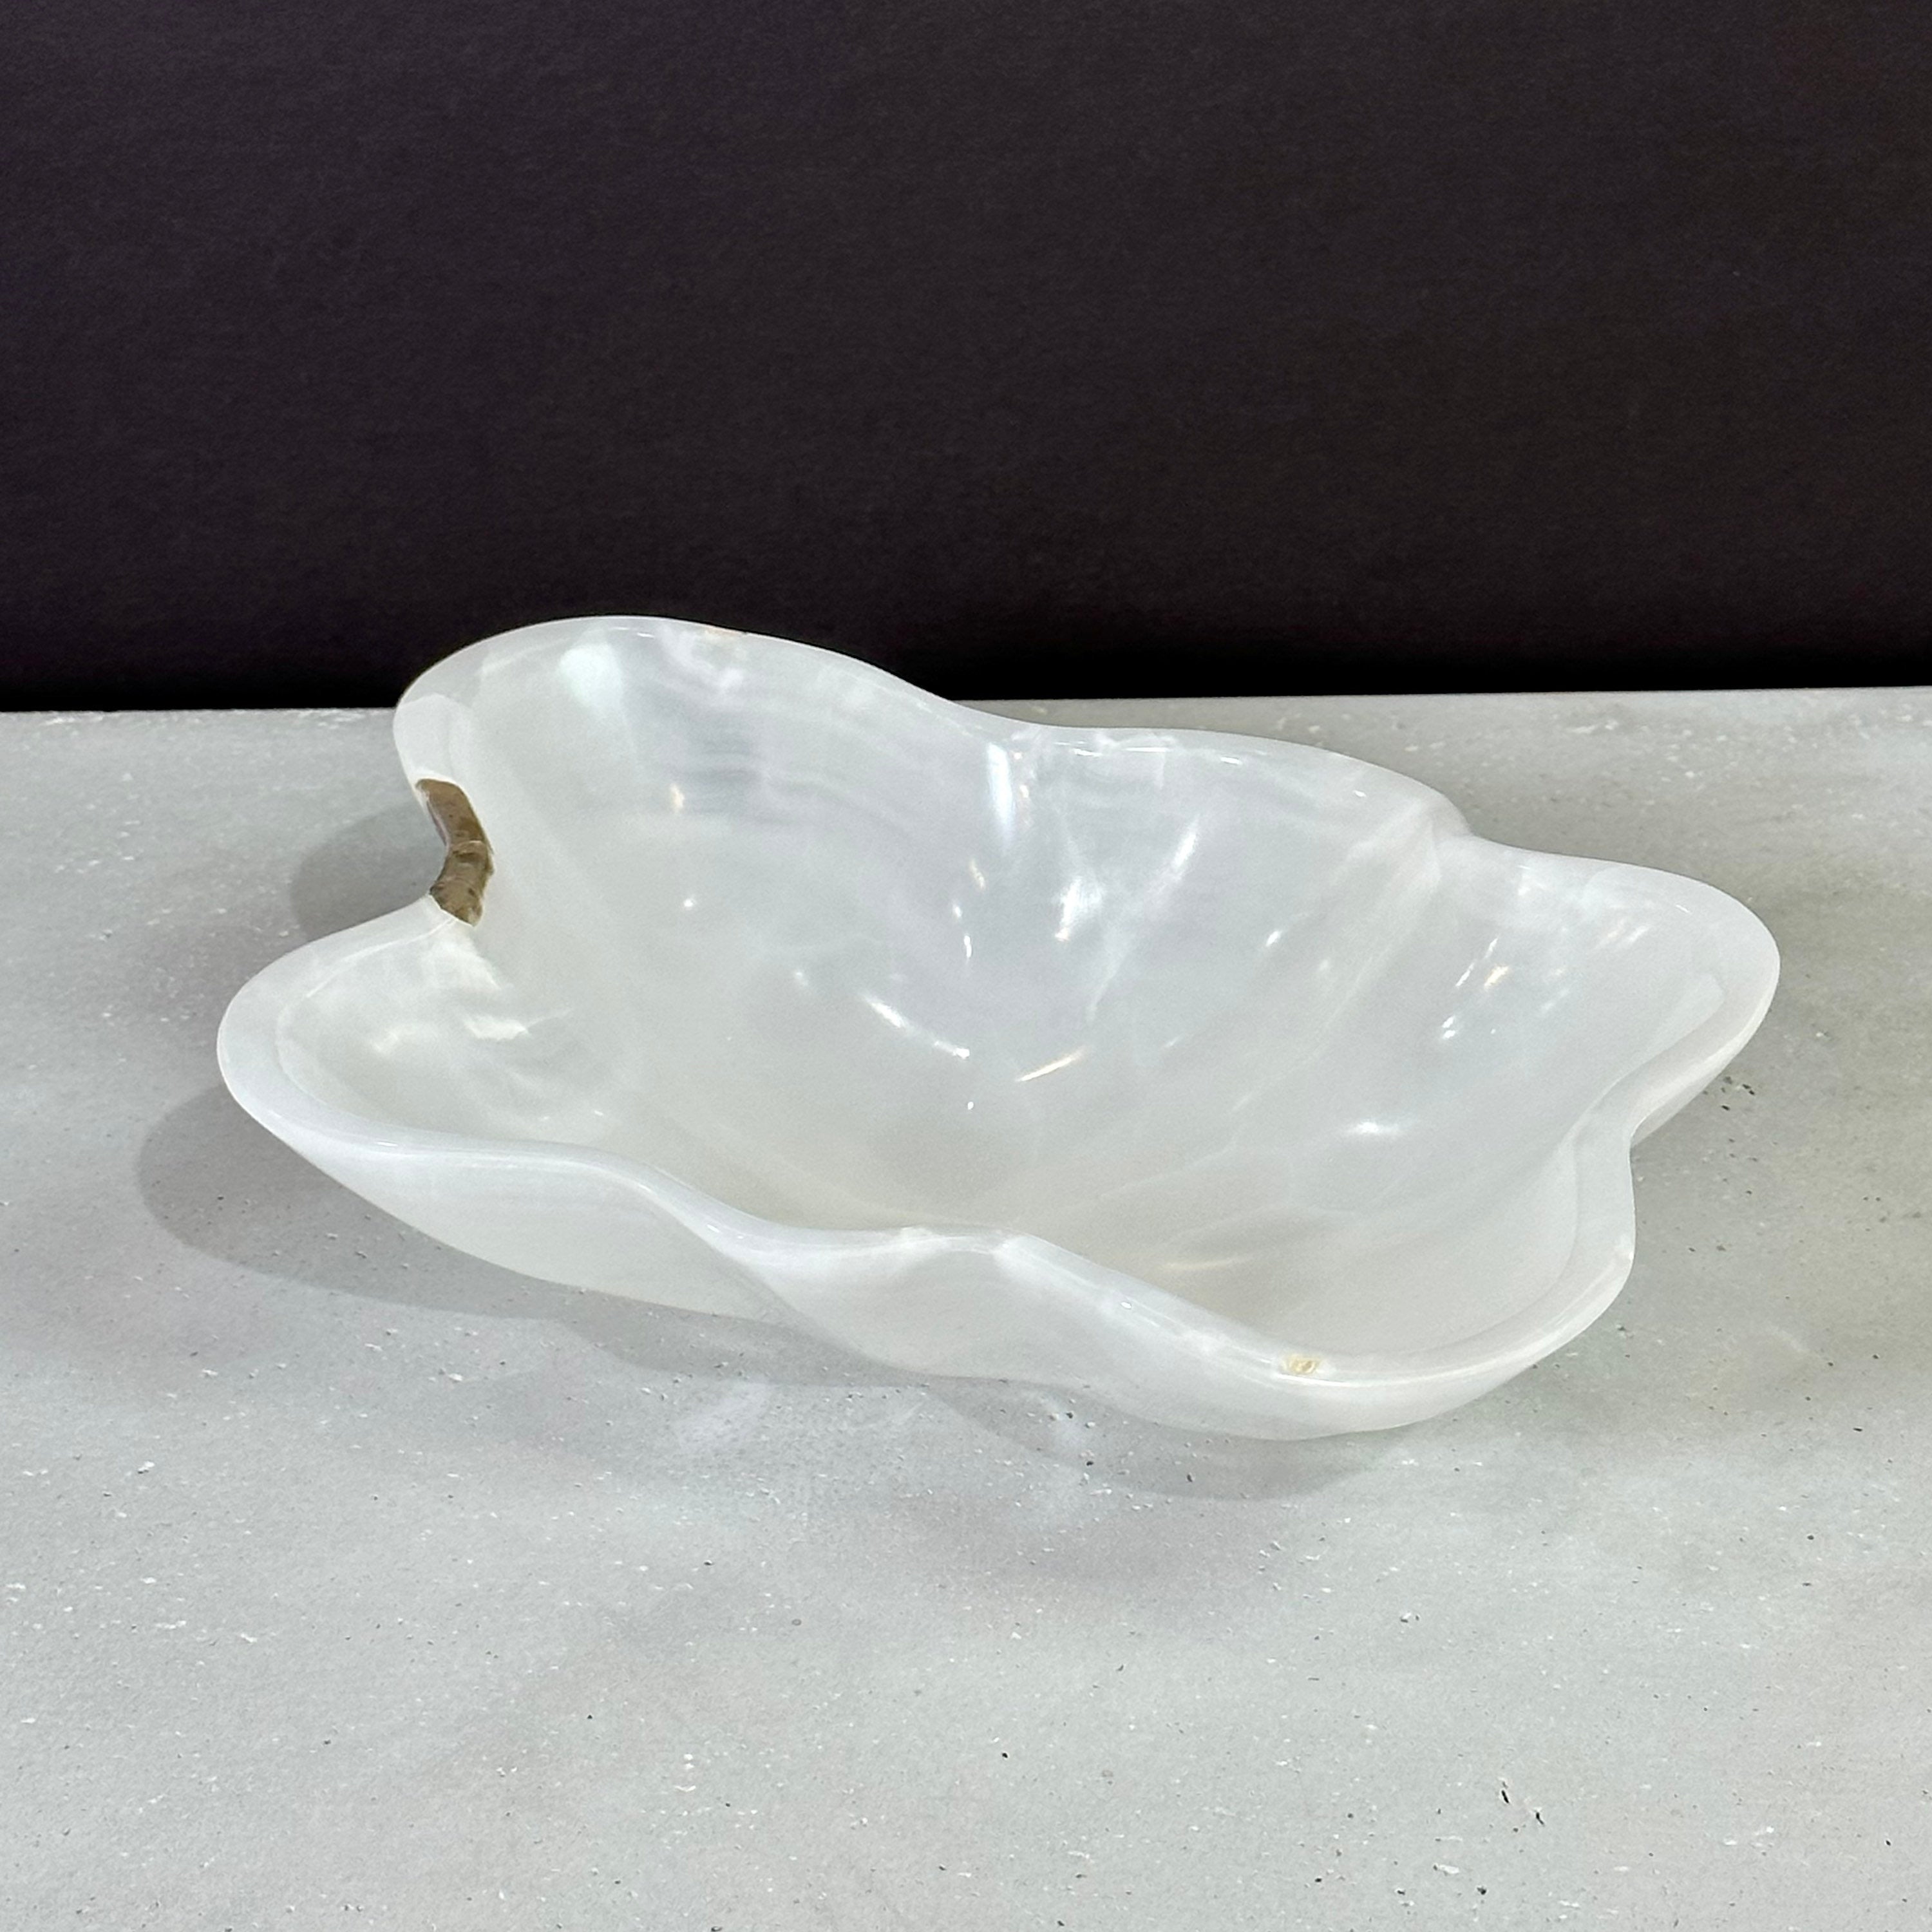 Luxurious Entryway Decor Bowl - Handmade with Pearlescent Onyx - Truly Unique - Exquisite Crystal - One-of-a-Kind Masterpiece